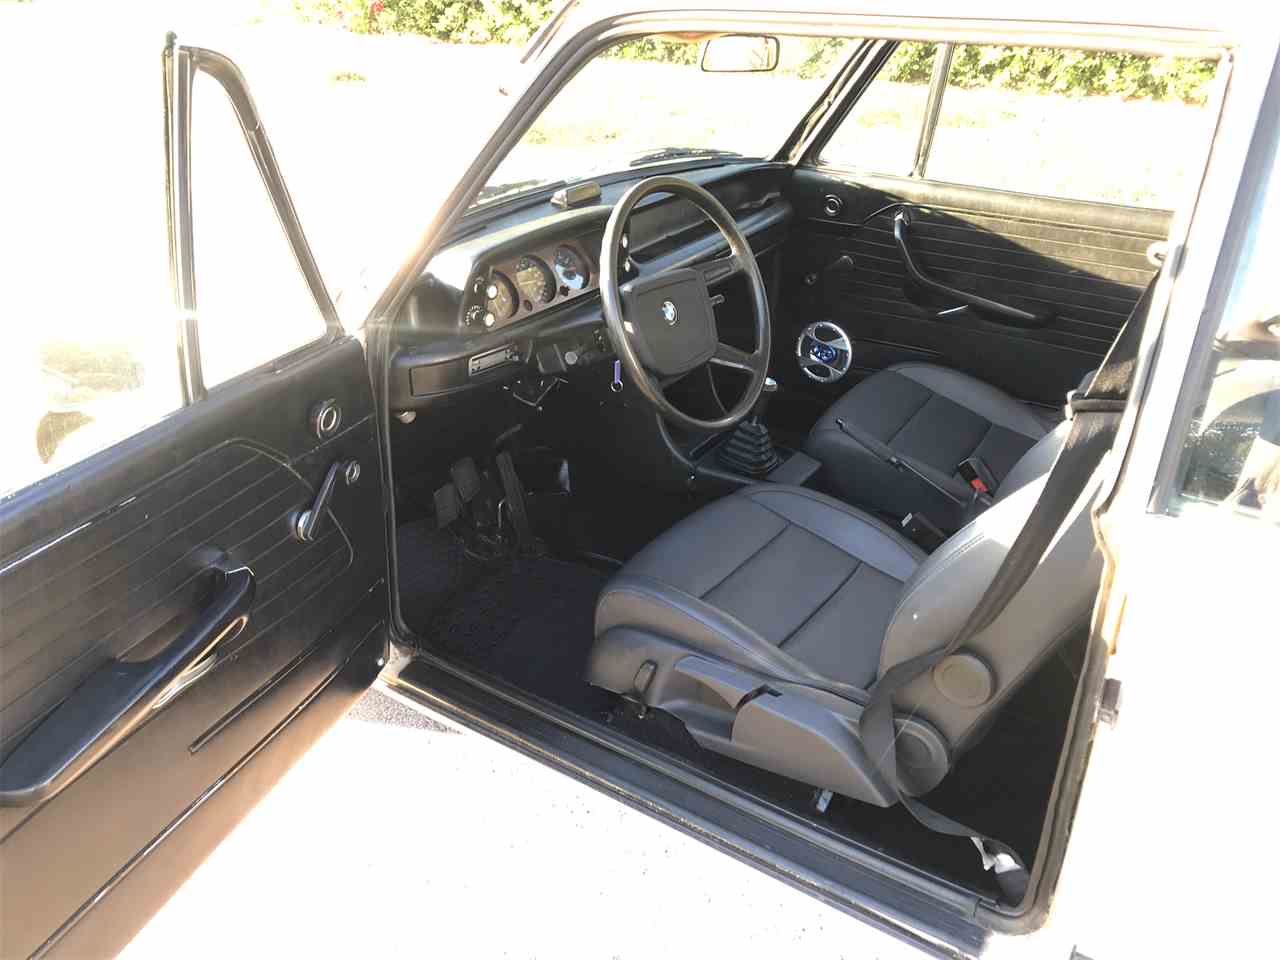 BMW, BMW 2002 with sunroof, ClassicCars.com Journal